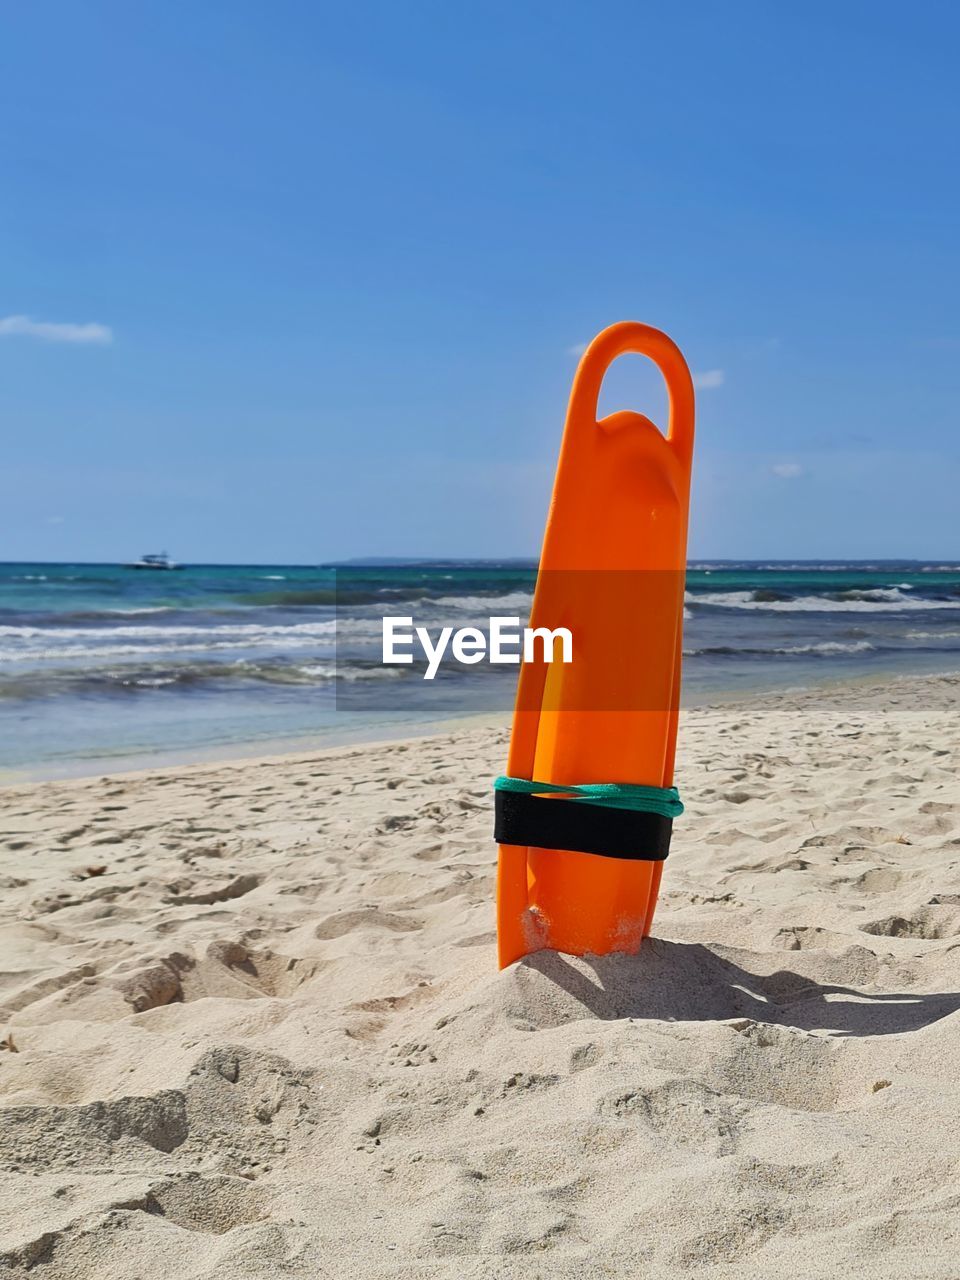 beach, land, sea, sand, water, sky, nature, ocean, surfing equipment, body of water, shore, horizon over water, wave, blue, horizon, scenics - nature, beauty in nature, summer, tranquility, coast, vacation, trip, surfboard, sunlight, holiday, day, no people, sunny, tranquil scene, outdoors, absence, orange color, sports, clear sky, relaxation, wind wave, motion, travel destinations, chair, idyllic, lifeguard, water sports, copy space